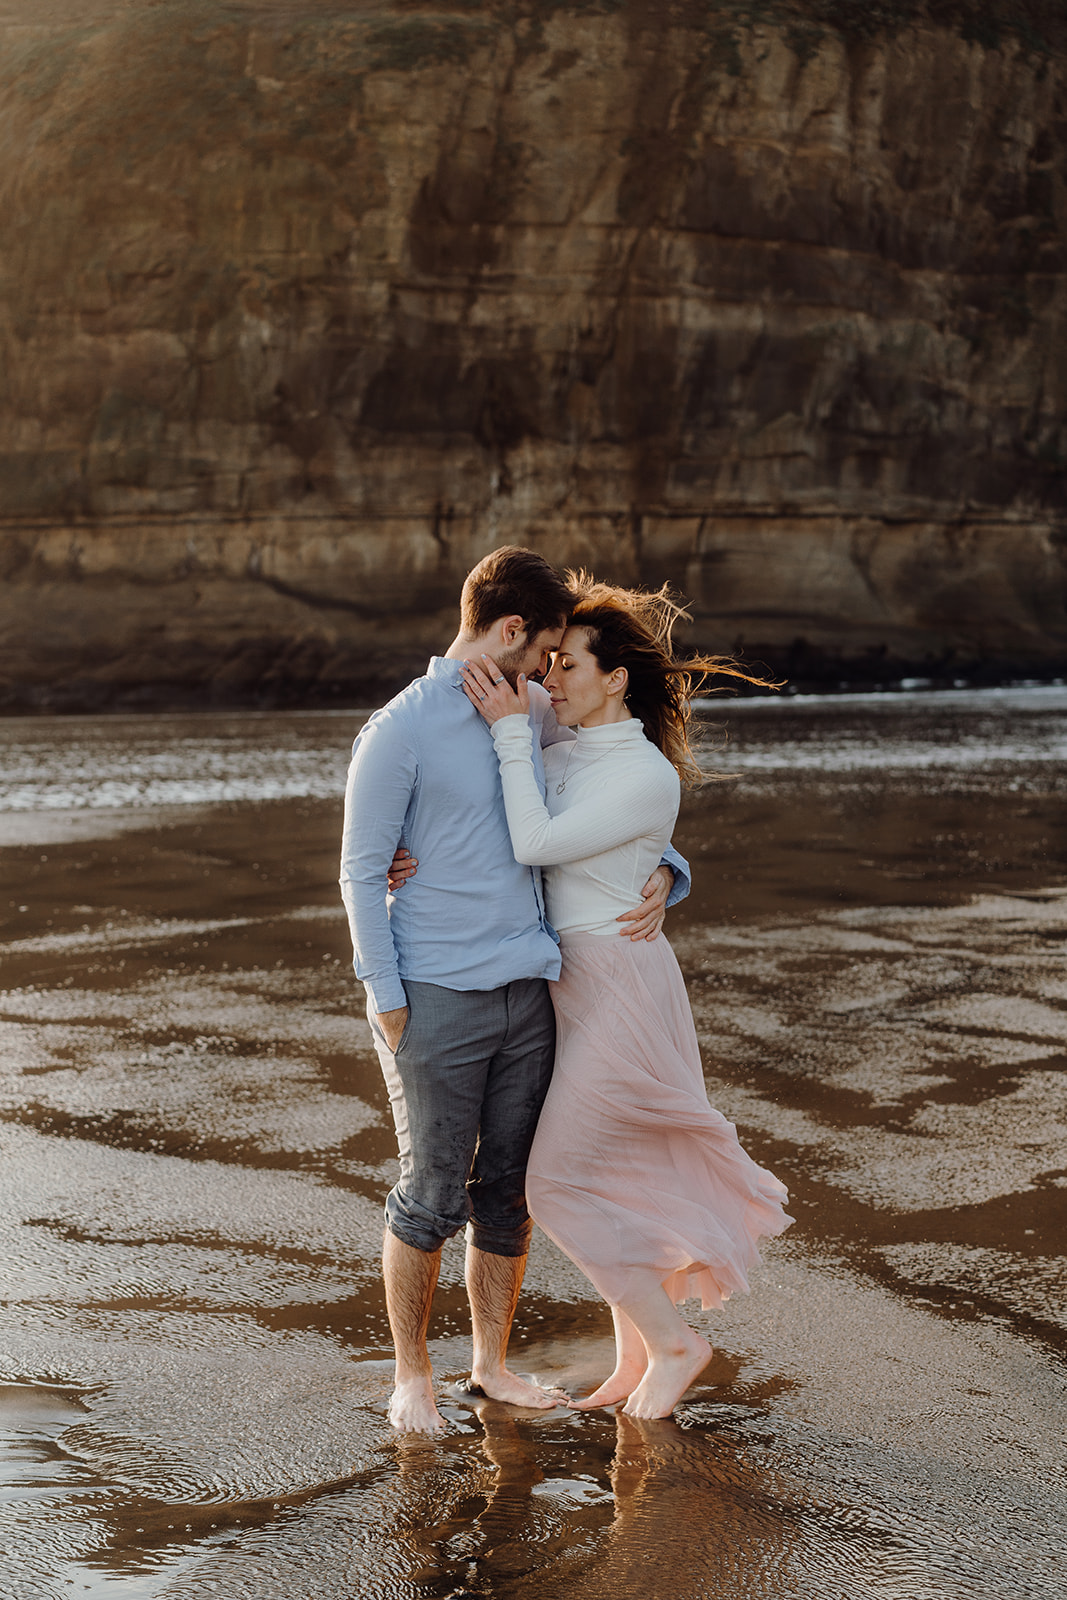 An engaged couple during a pre-wedding photoshoot at Muriwai by Waikato Photographer Haley Adele